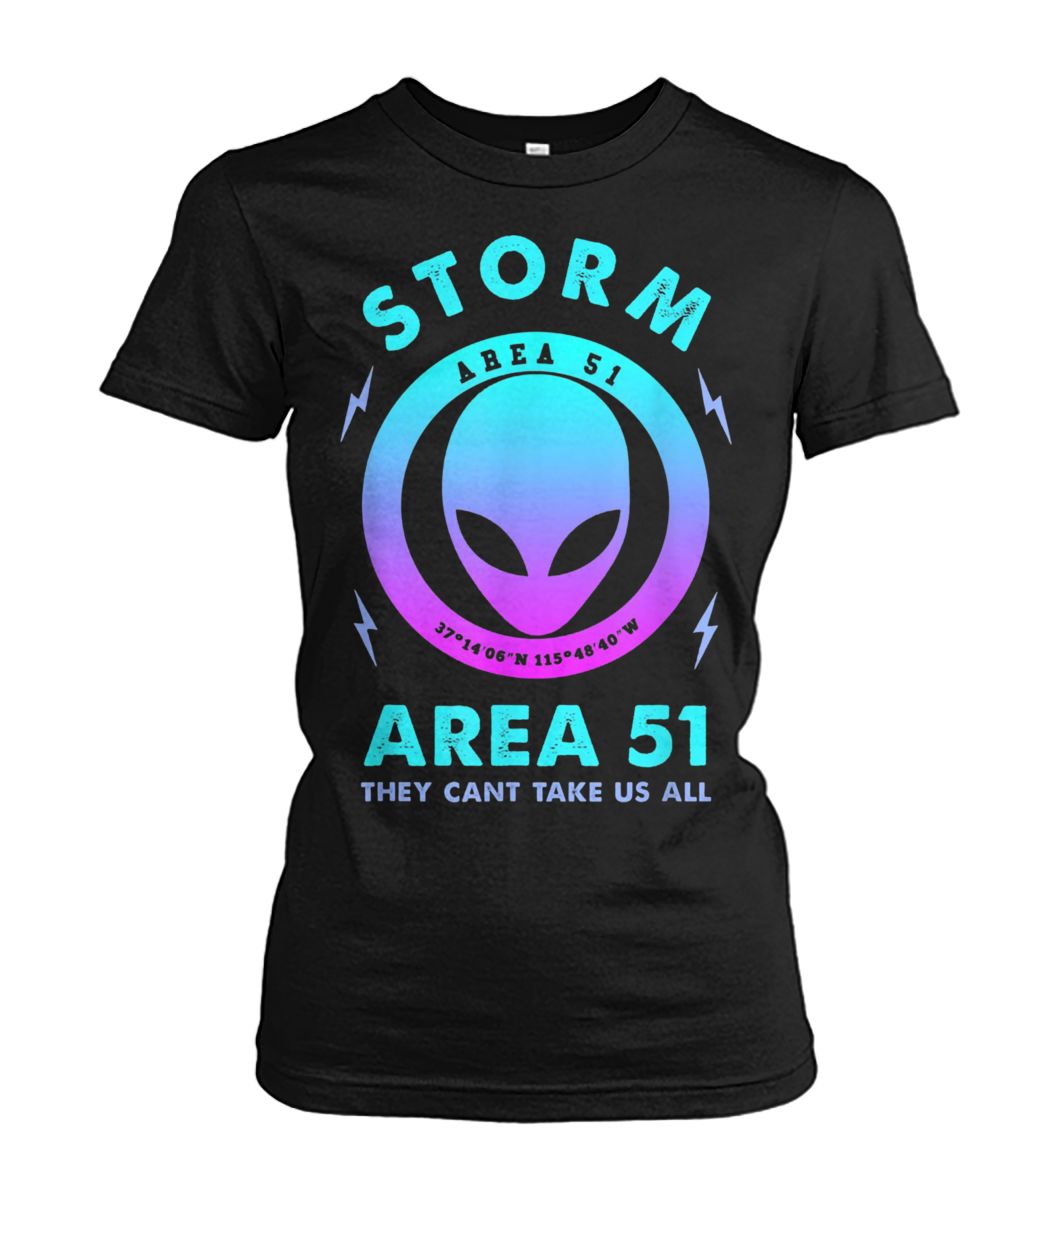 Storm area 51 alien they can't stop all us women's crew tee